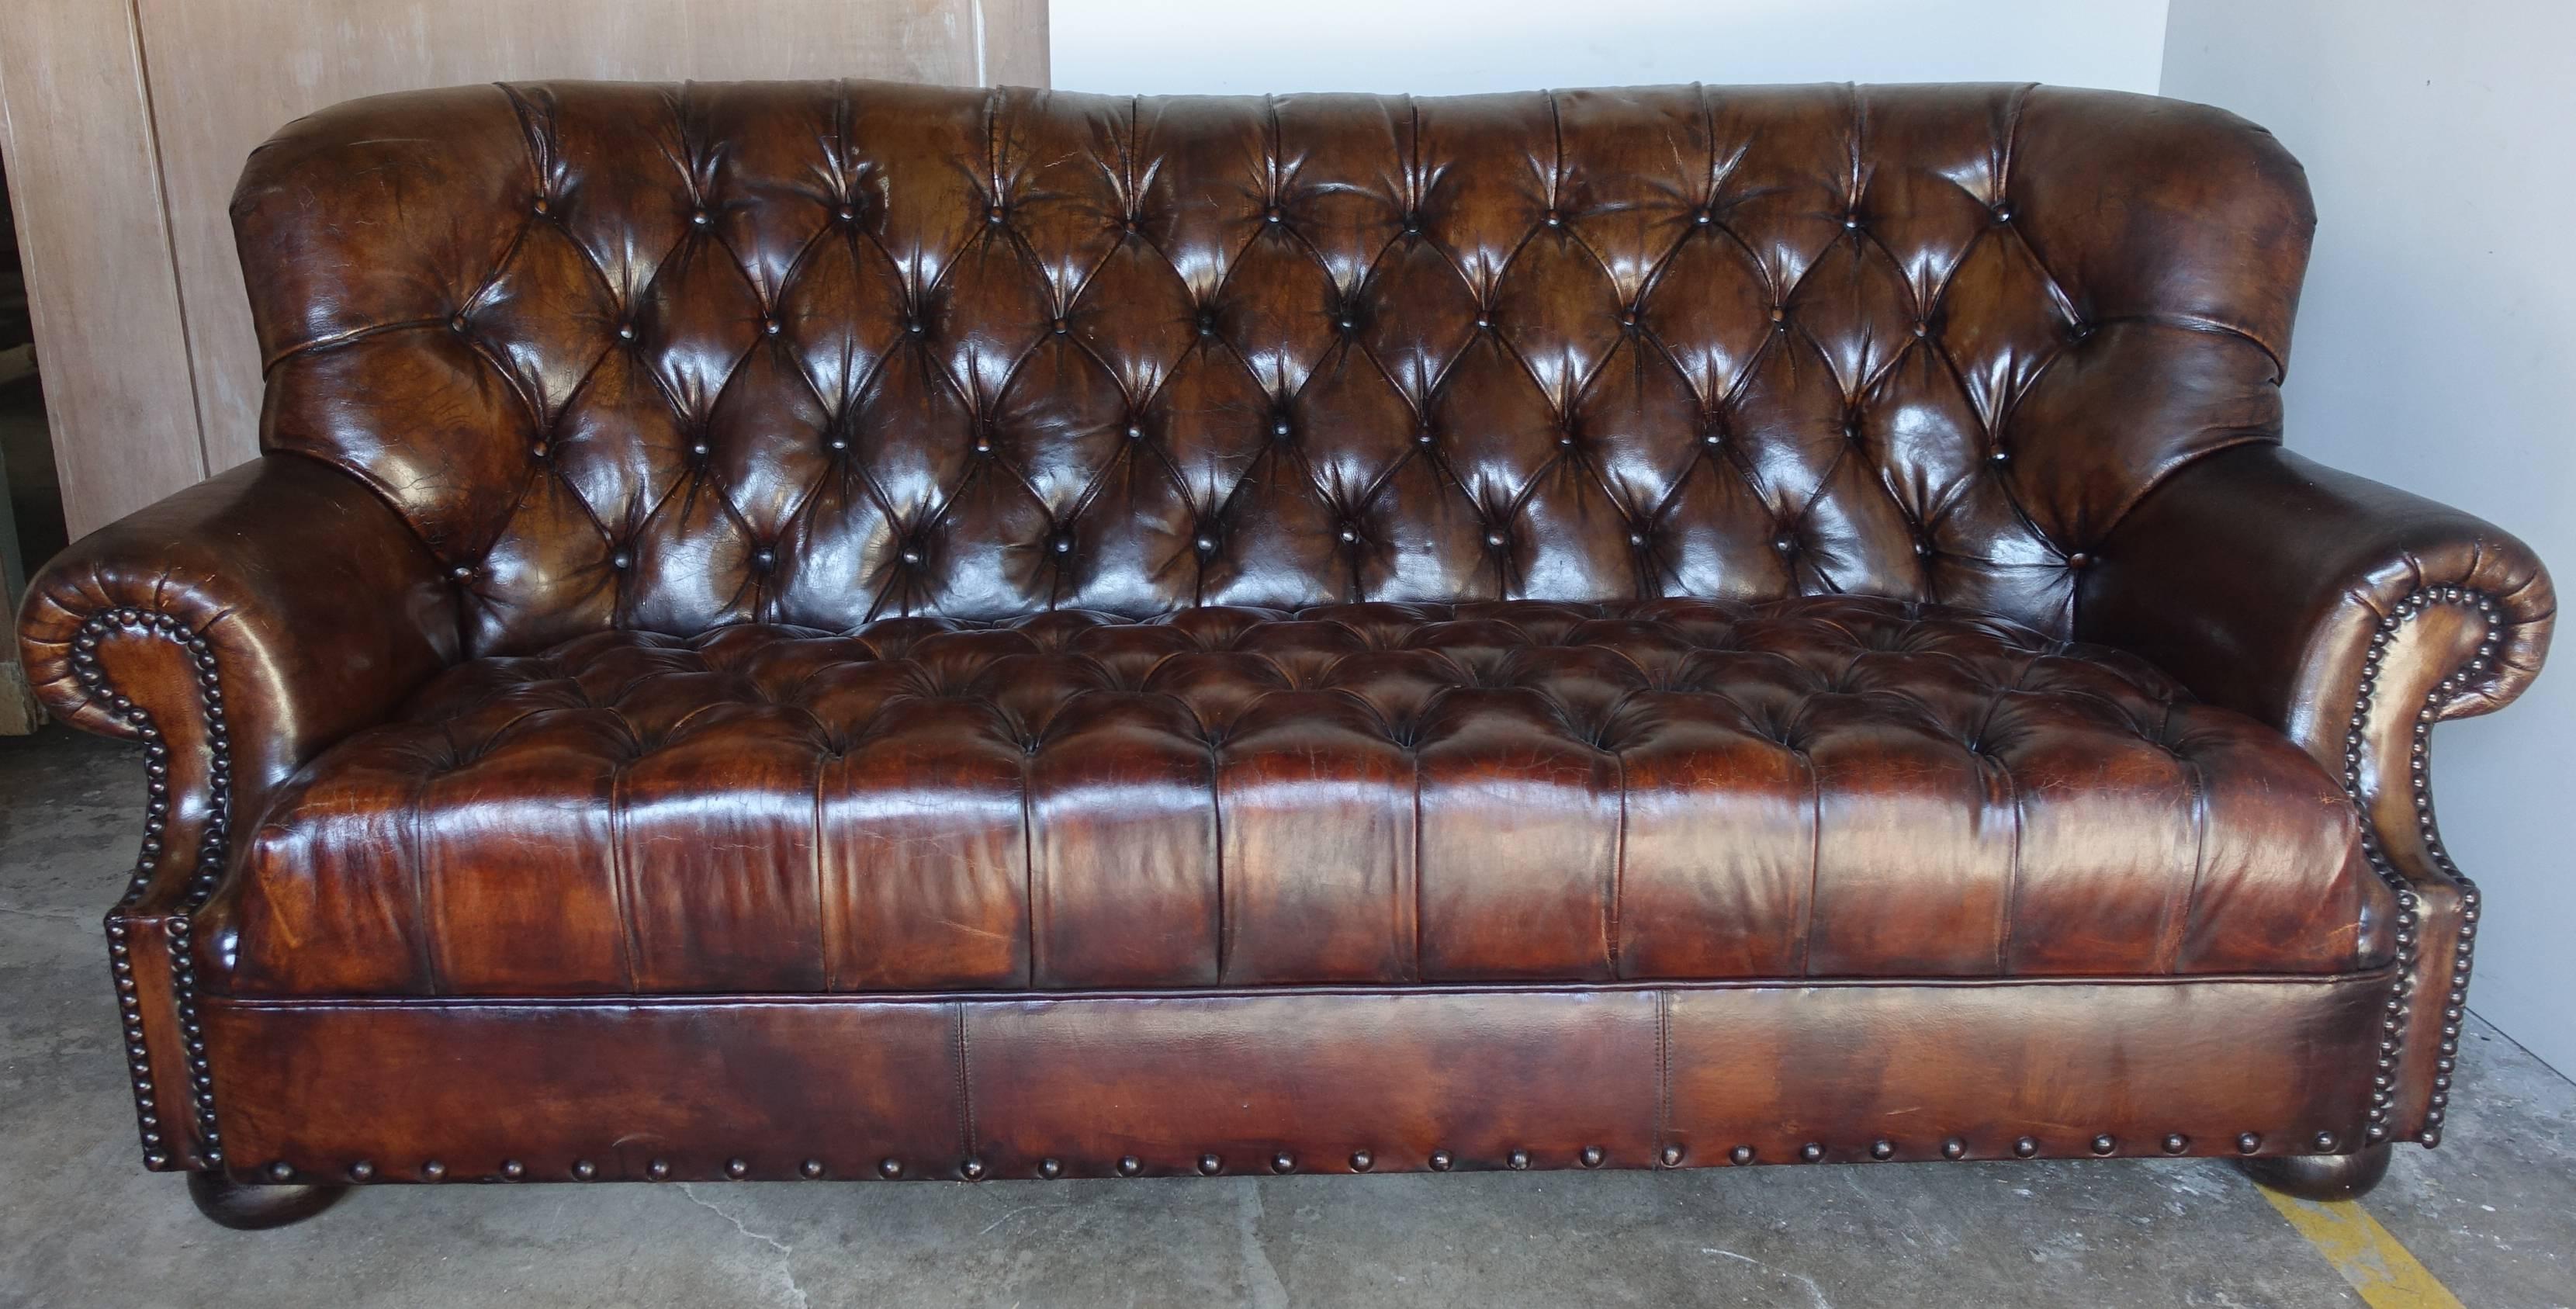 English leather tufted rolled arm sofa with nailhead trim detail. The sofa stands on four bun style feet.